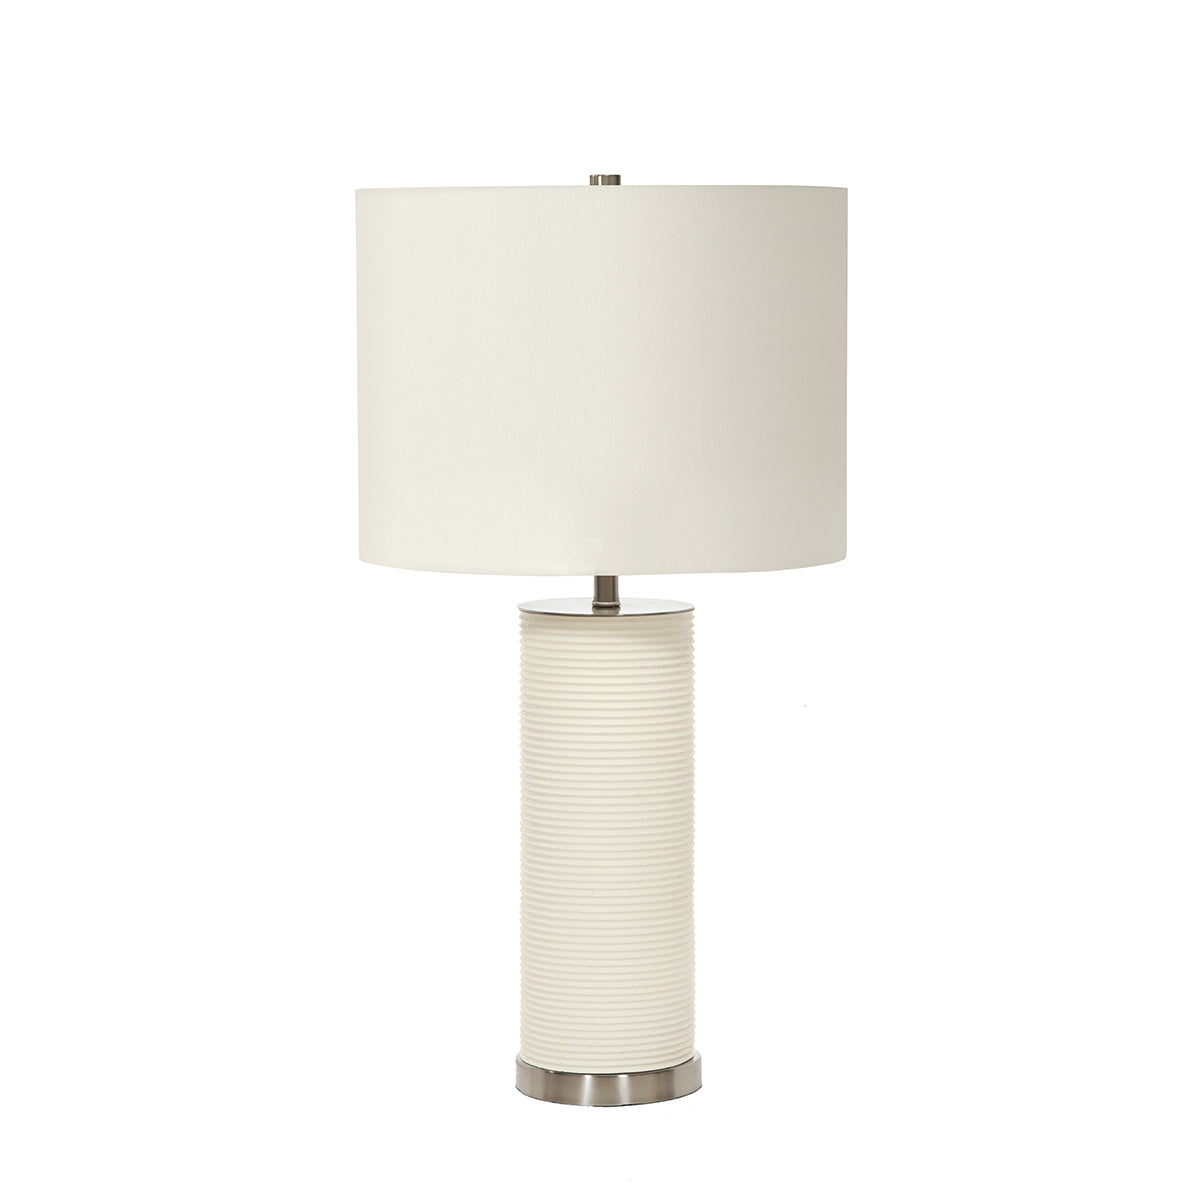 The Vaughan Lamp Available in white or black.